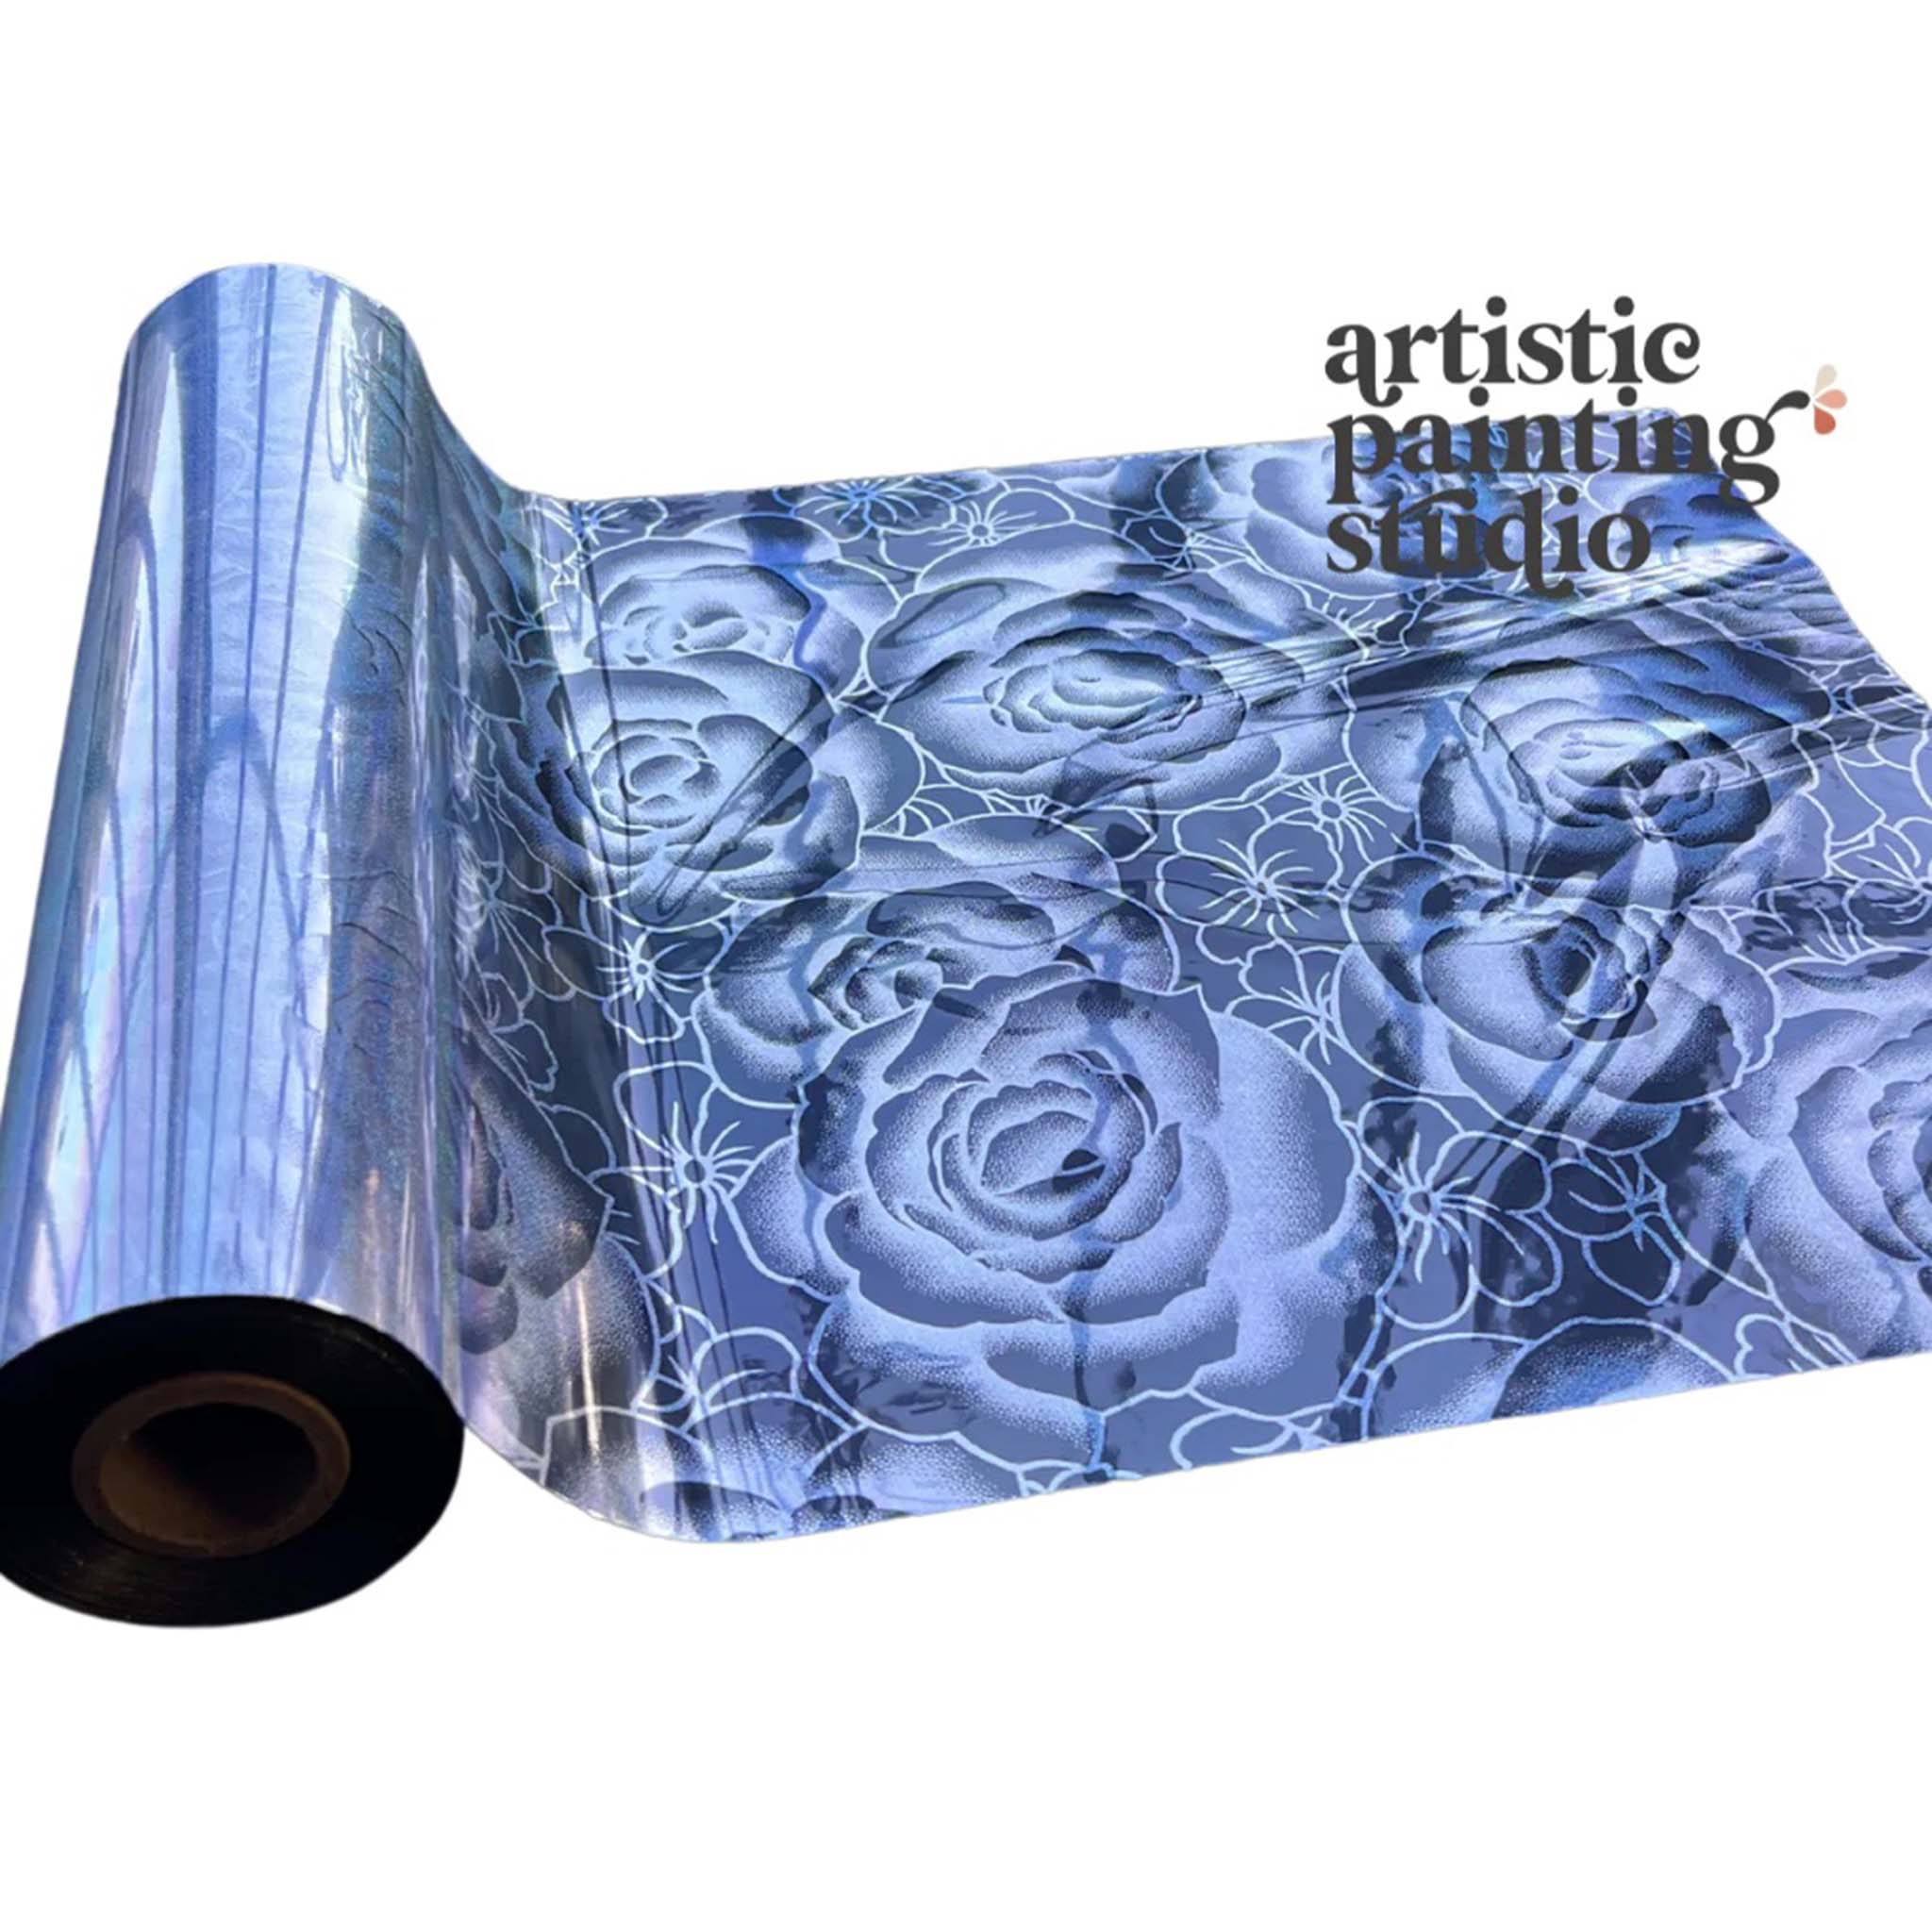 A roll of a holographic silver metallic transfer foil that features rose and flower blooms is against a white background.